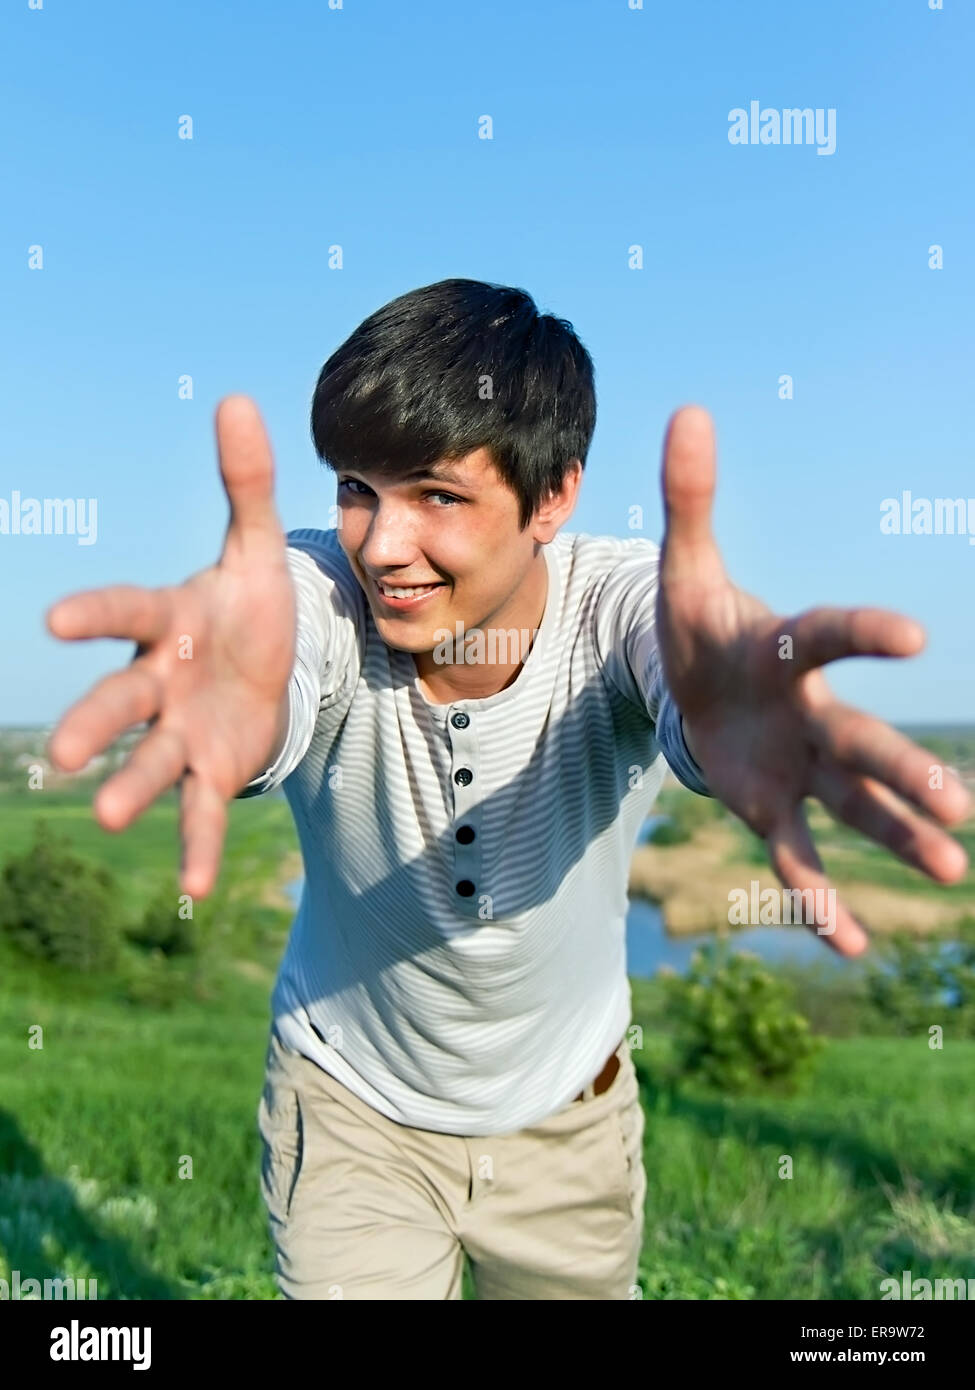 cheerful guy with outstretched arms outdoors Stock Photo